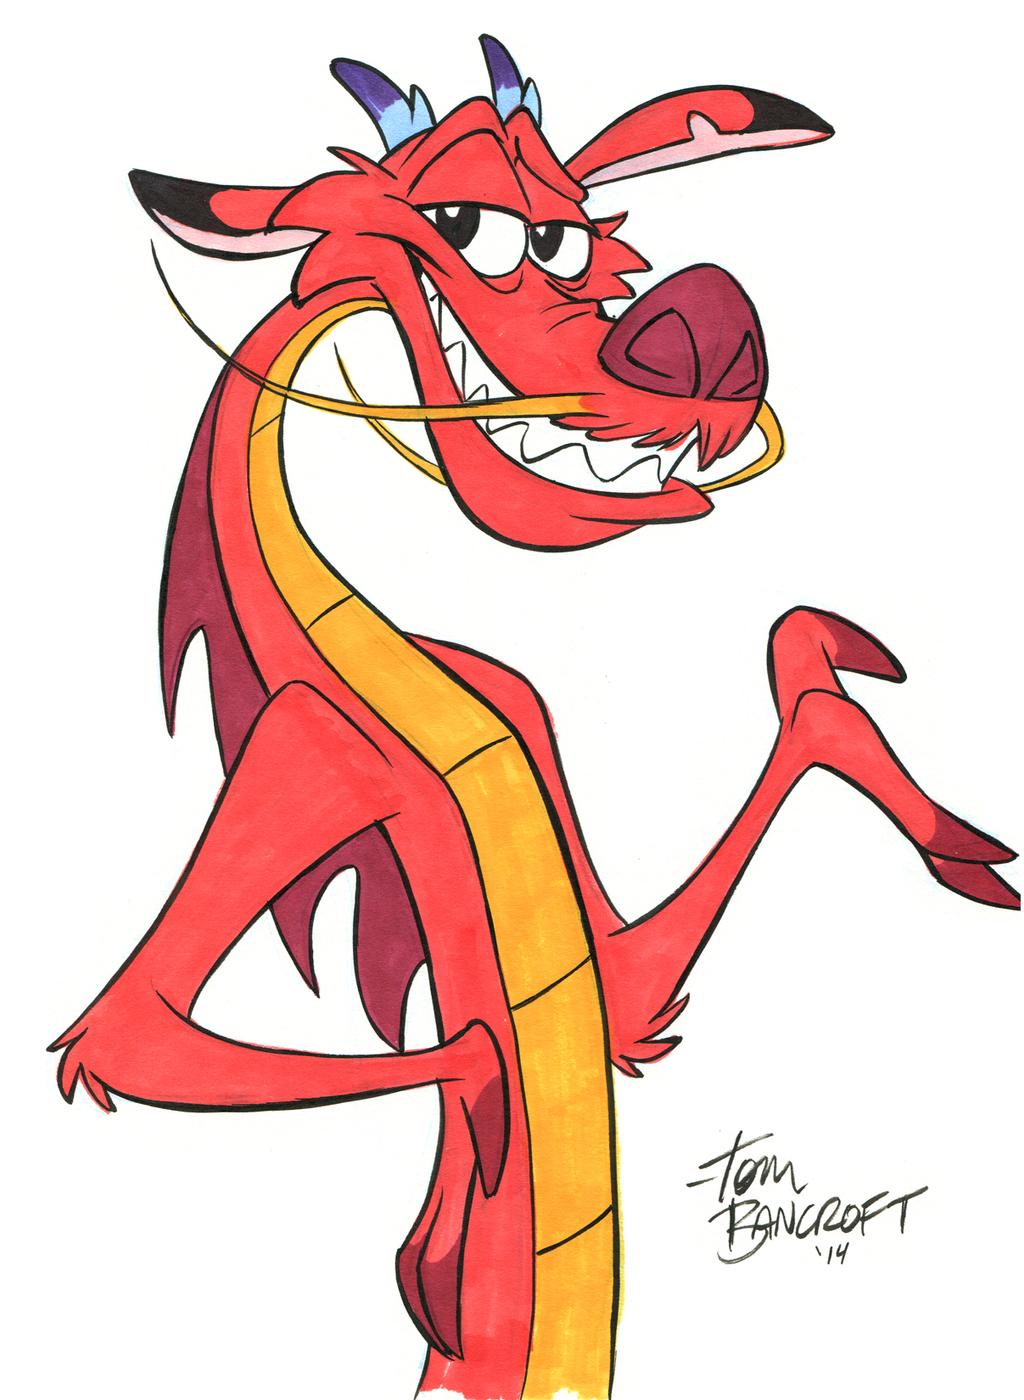 mushu_in_color_by_tombancroft_d7dgint-fullview.jpg